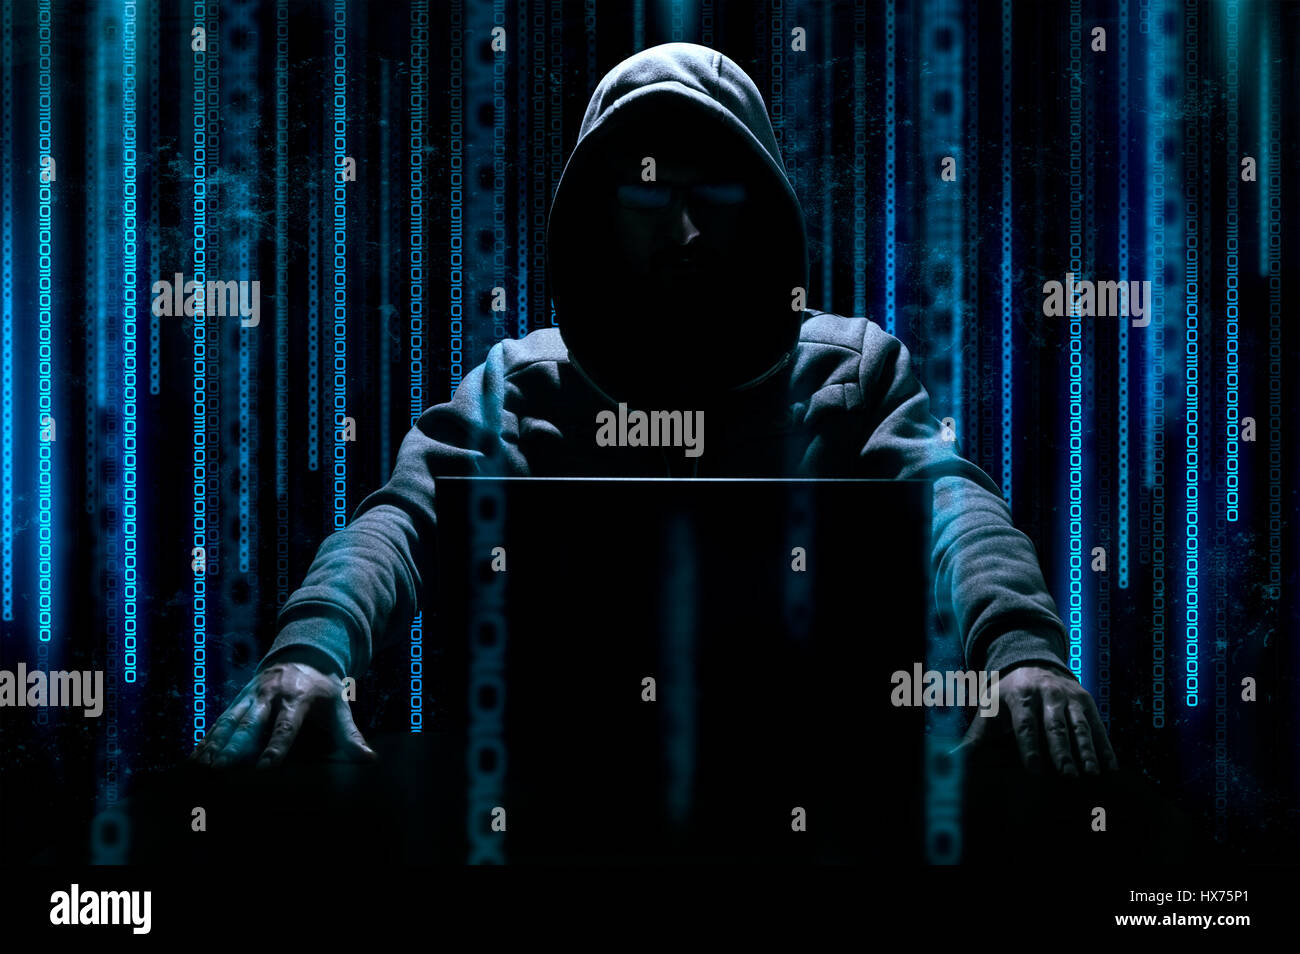 Hacker sits behind laptop with binary code on background Stock Photo